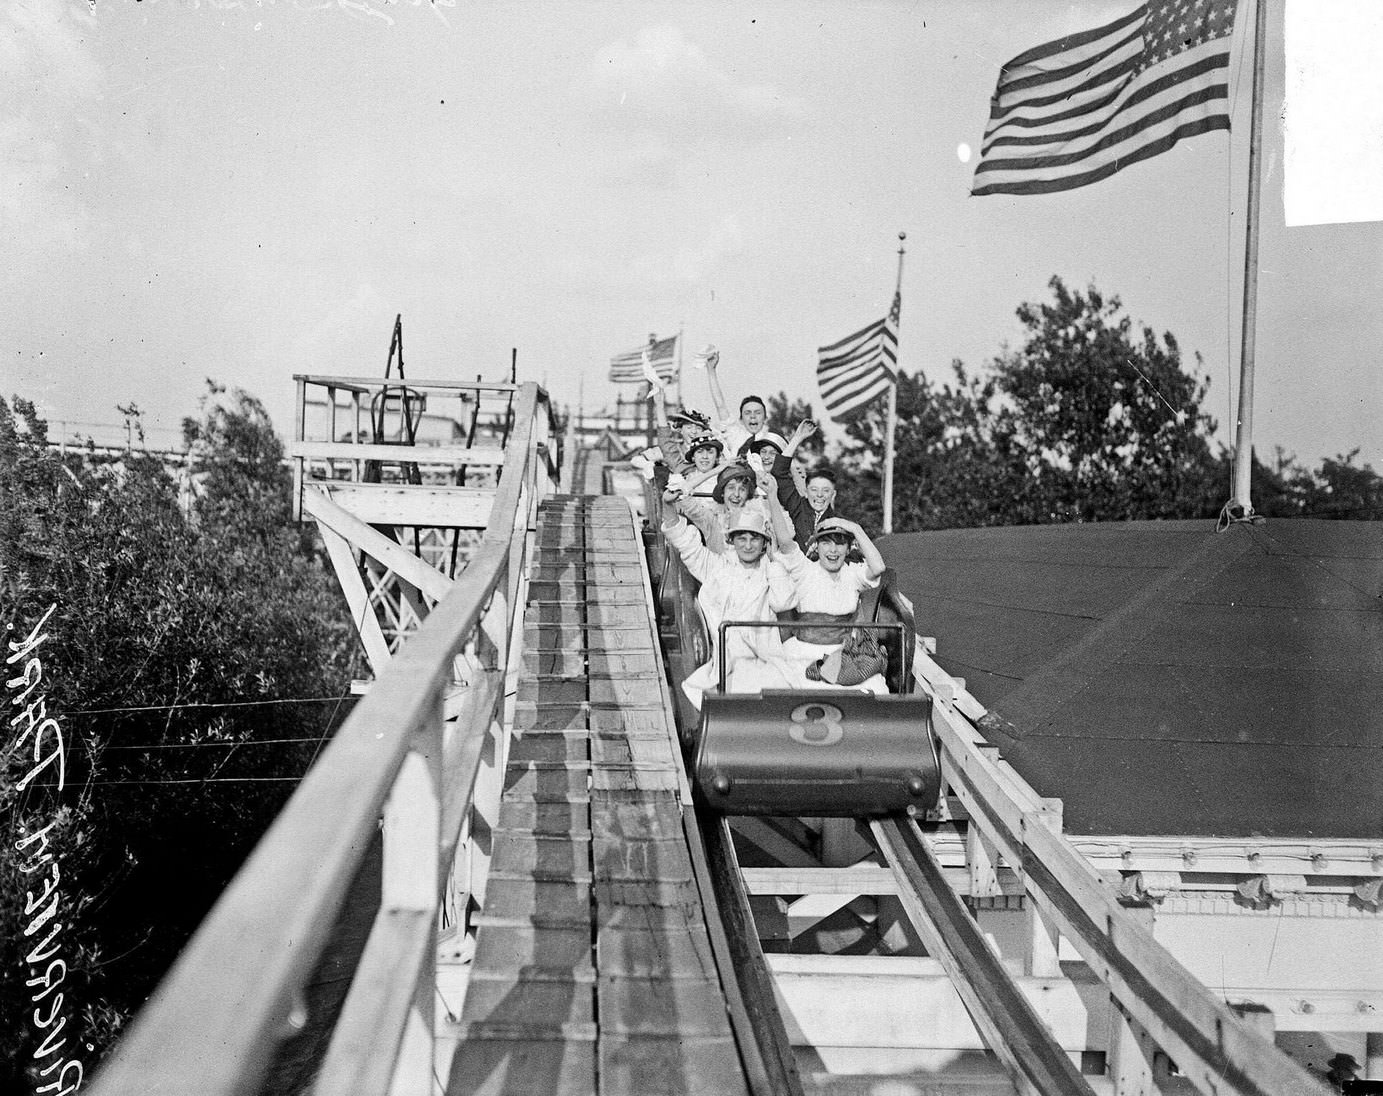 Parkgoers riding the Bob #3 roller coaster at Riverview Park, Chicago, Illinois, June 12, 1915.